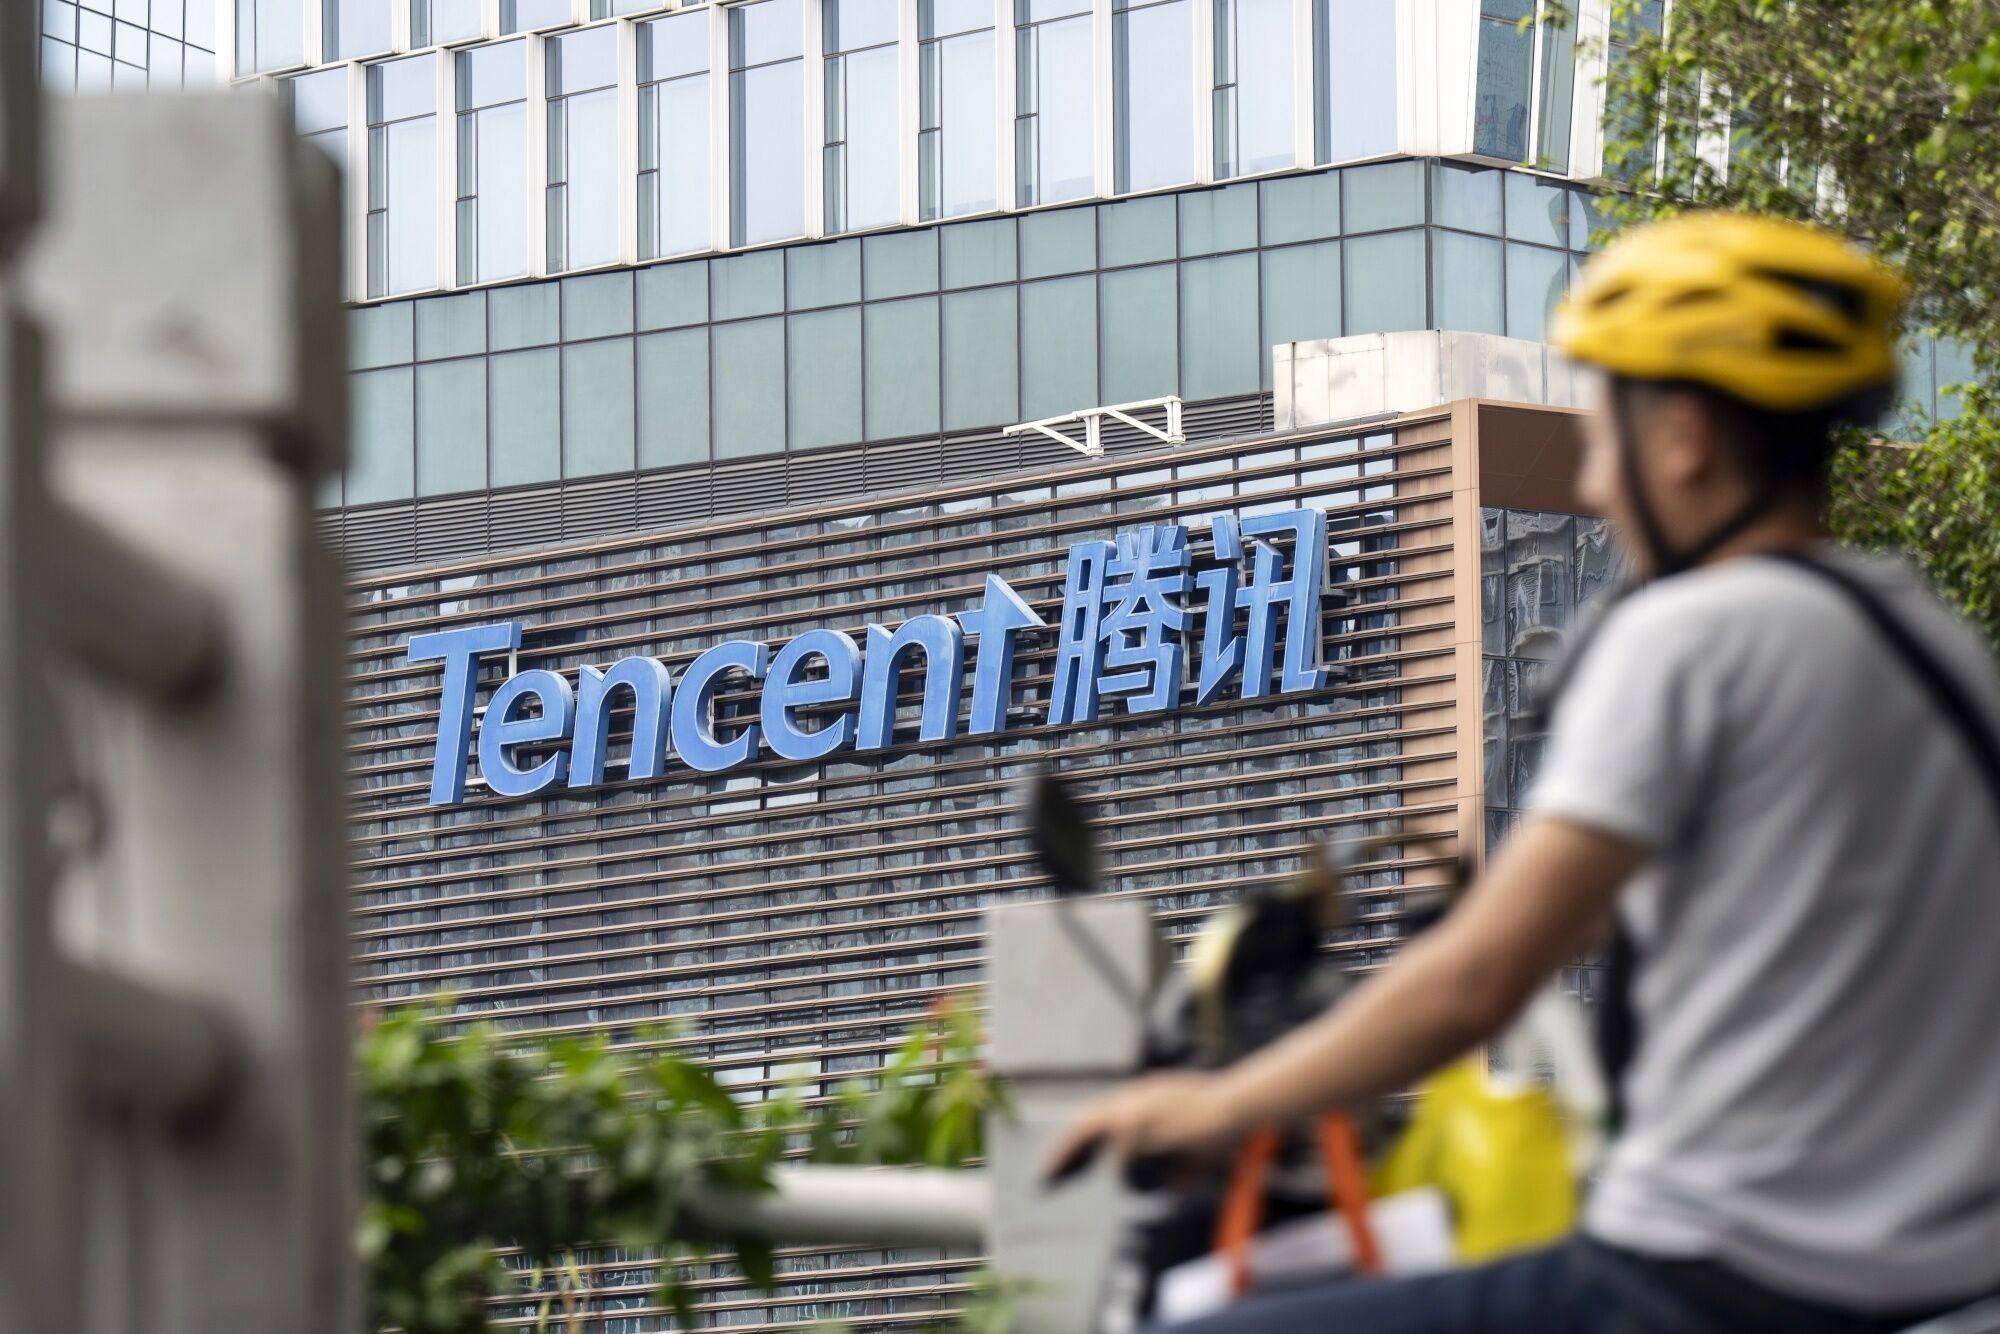 Tencent Holdings’ headquarters building in Shenzhen, China. Bellwethers like Tencent have led a tech-stock rebound as Beijing pivoted from a wide regulatory crackdown to focus on bolstering the economy. Photo: Bloomberg